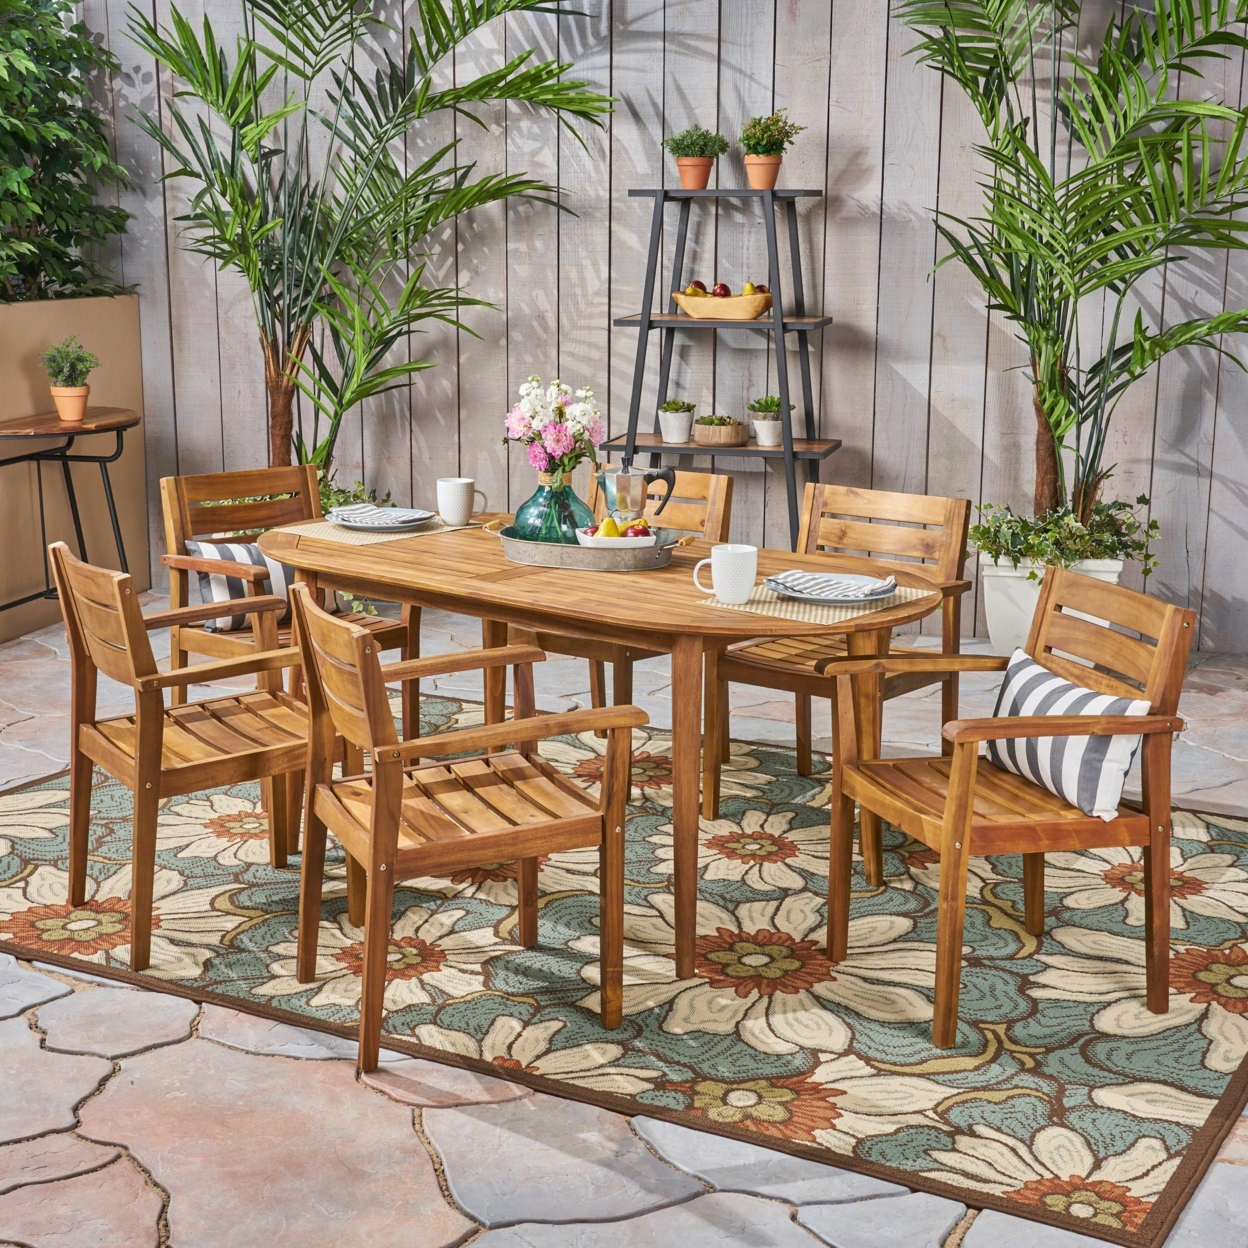 Stanford Patio Dining Set, 71 6-Seater, Oval Table, Acacia Wood With Teak Finish